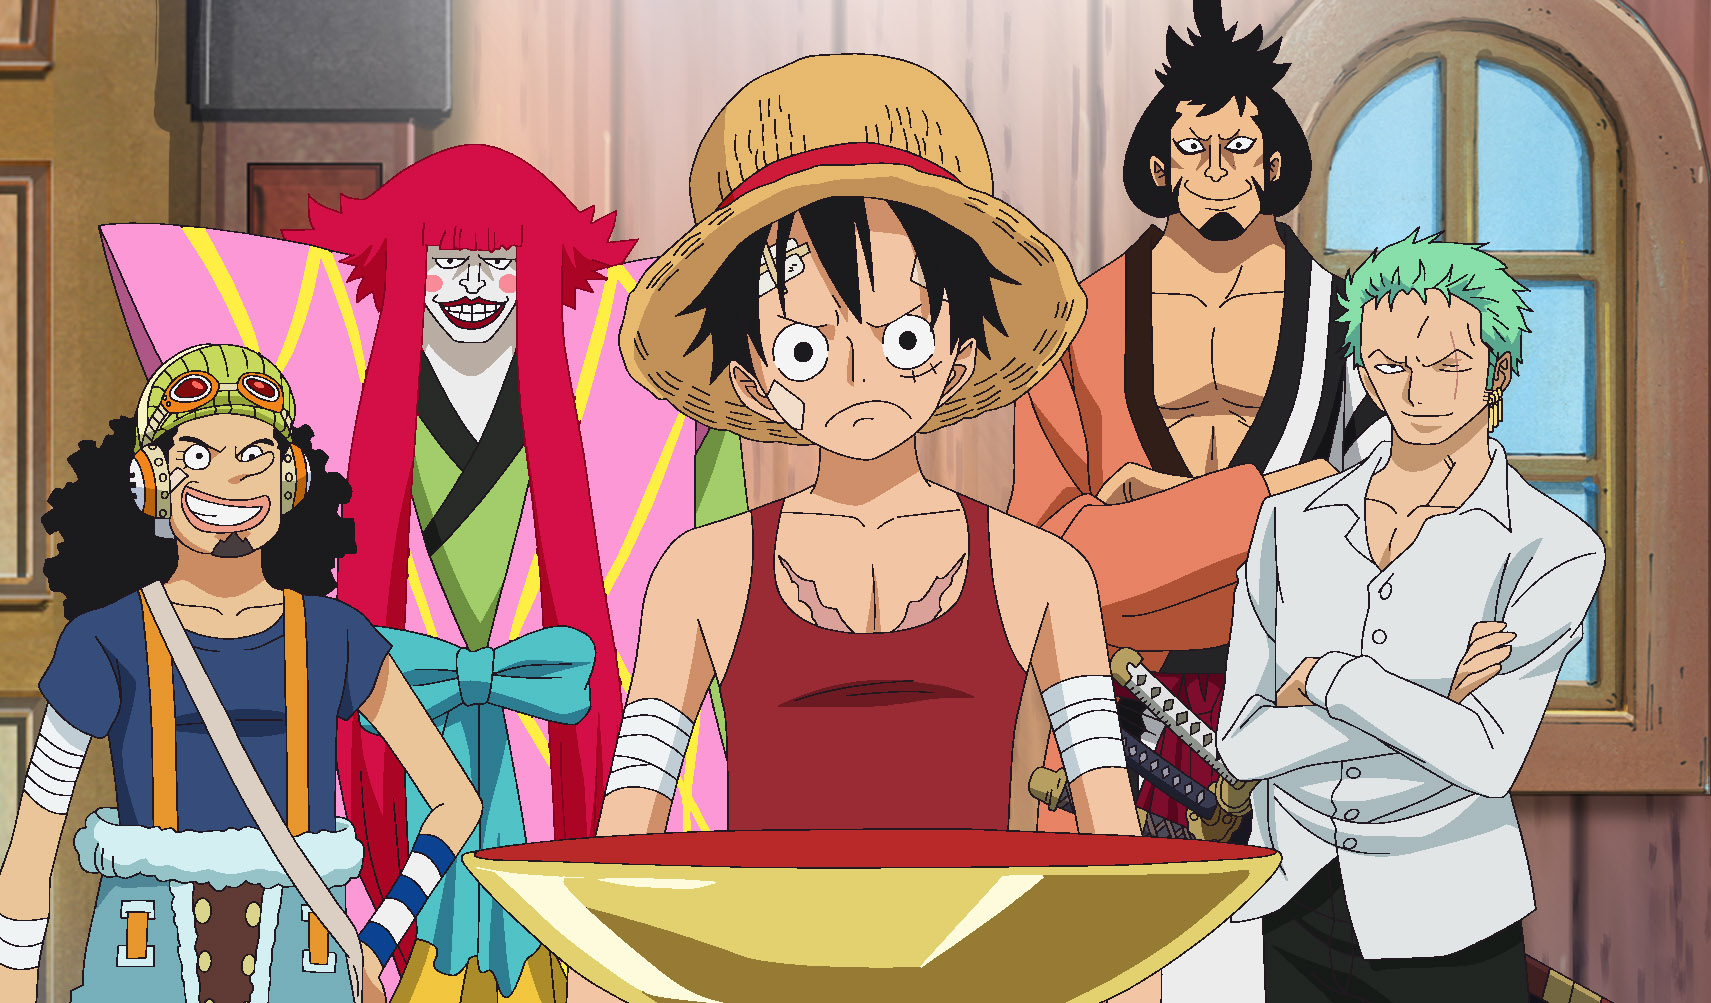 ﻿Full Episode One Piece Episode 198 Subtitle Indonesia Best Reviews